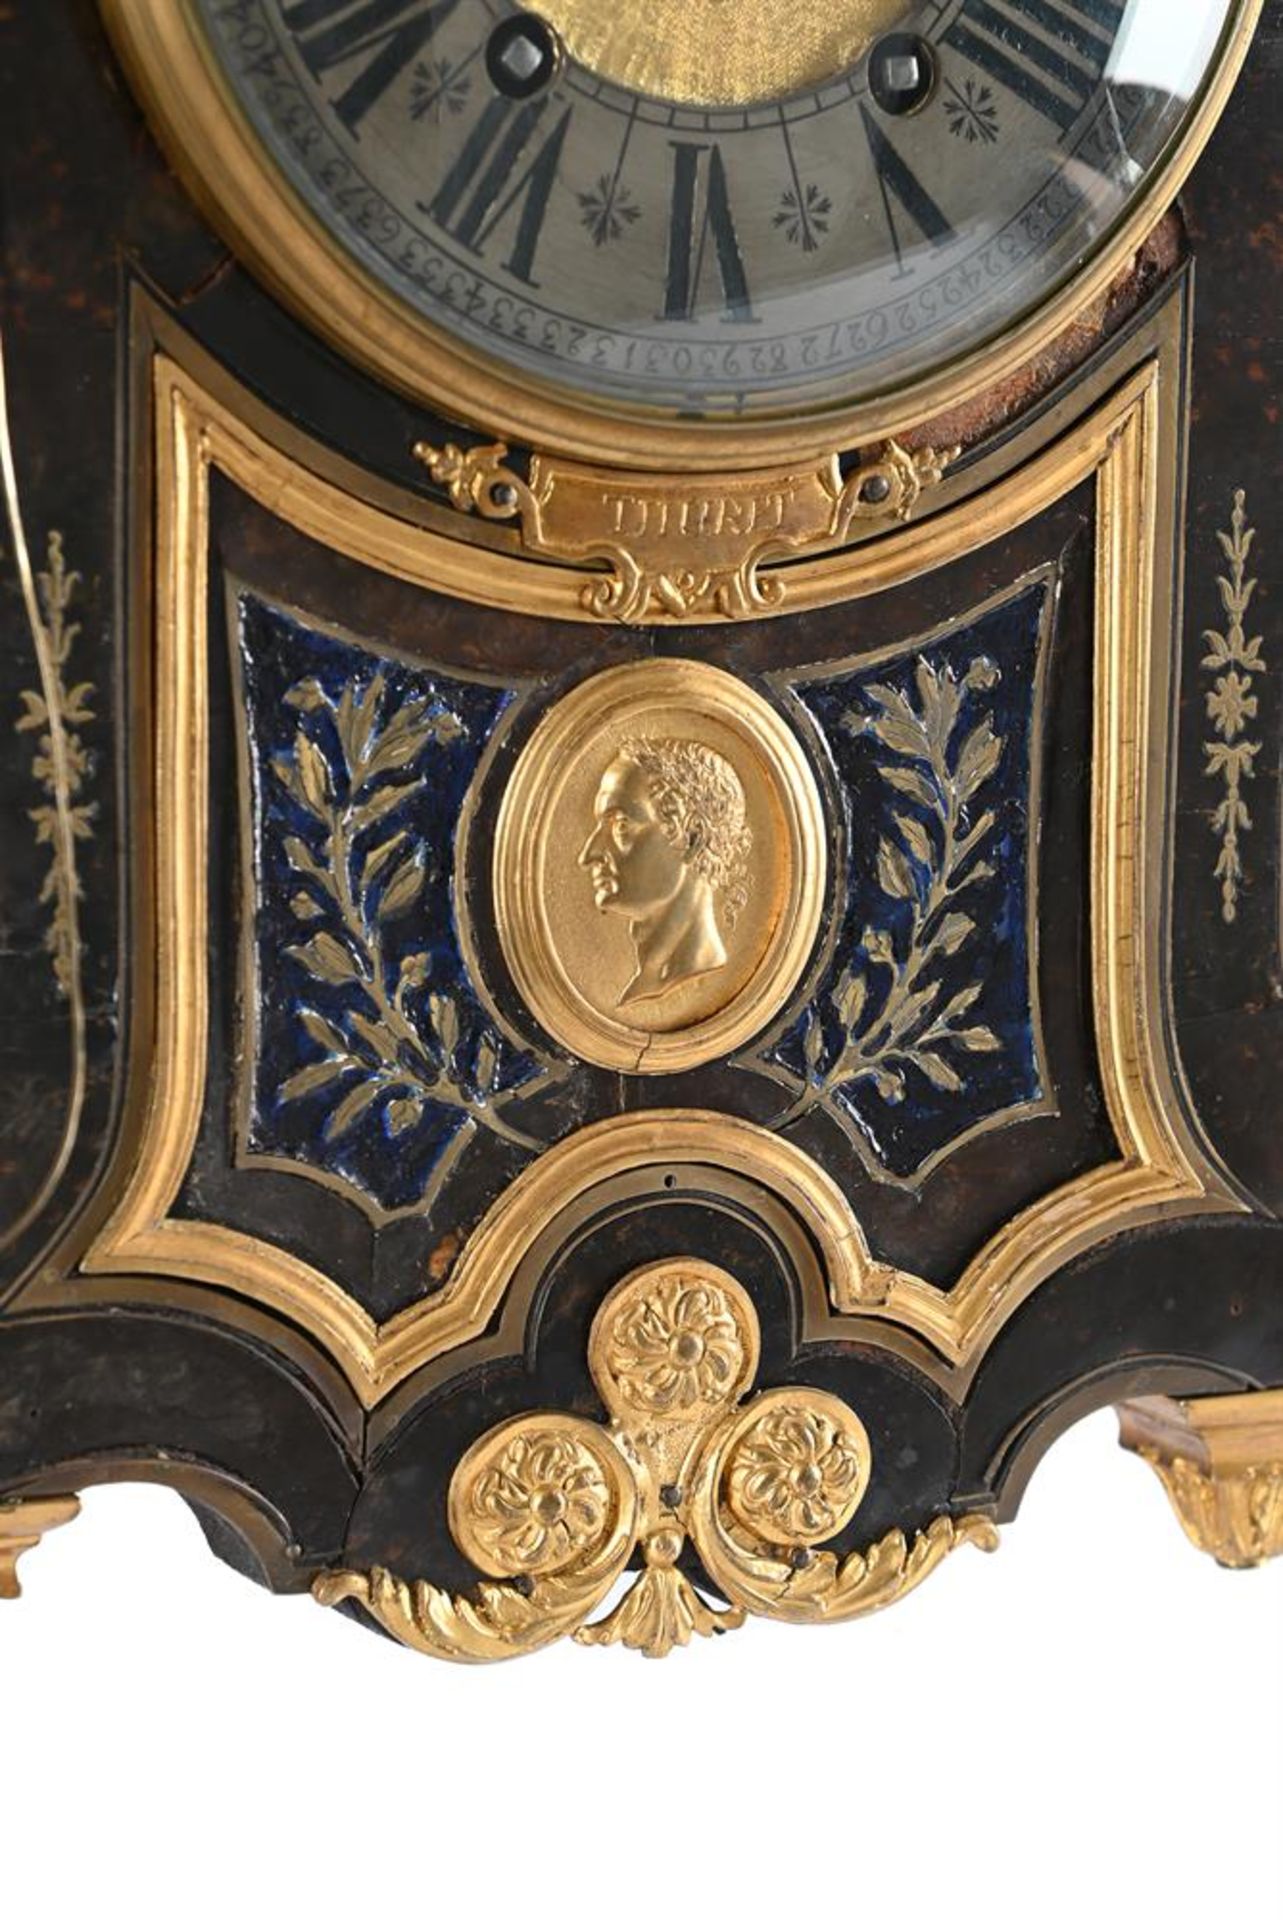 A FRENCH REGENCE BOULLE SMALL BRACKET CLOCK WITH LATER MOVEMENT, EARLY 18TH CENTURY AND LATER - Image 3 of 5